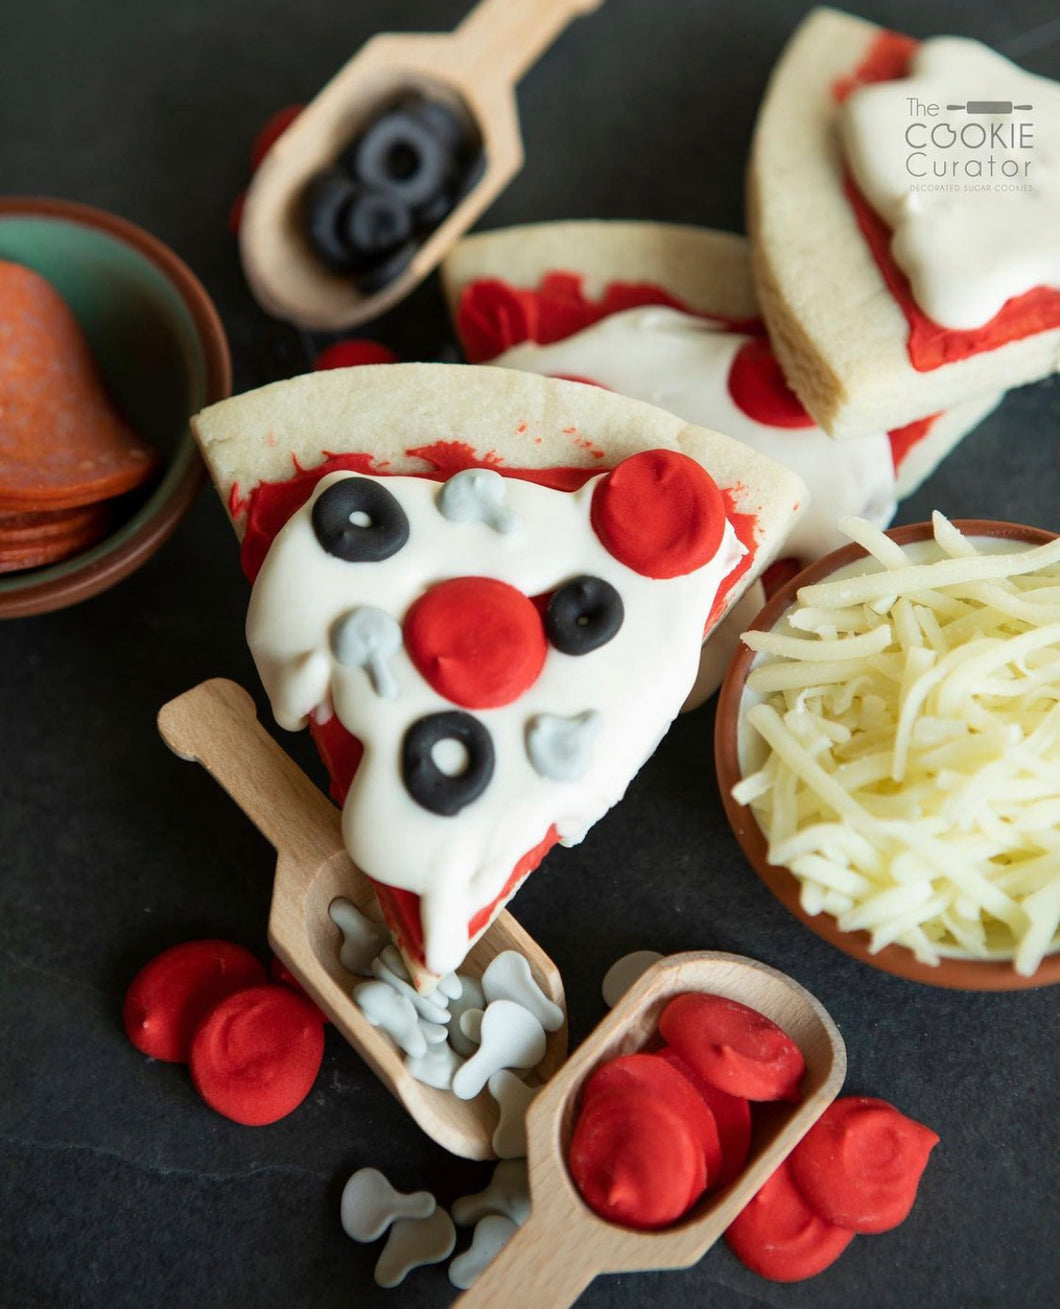 Build-Your-Own Pizza Cookie Kit & Virtual Class